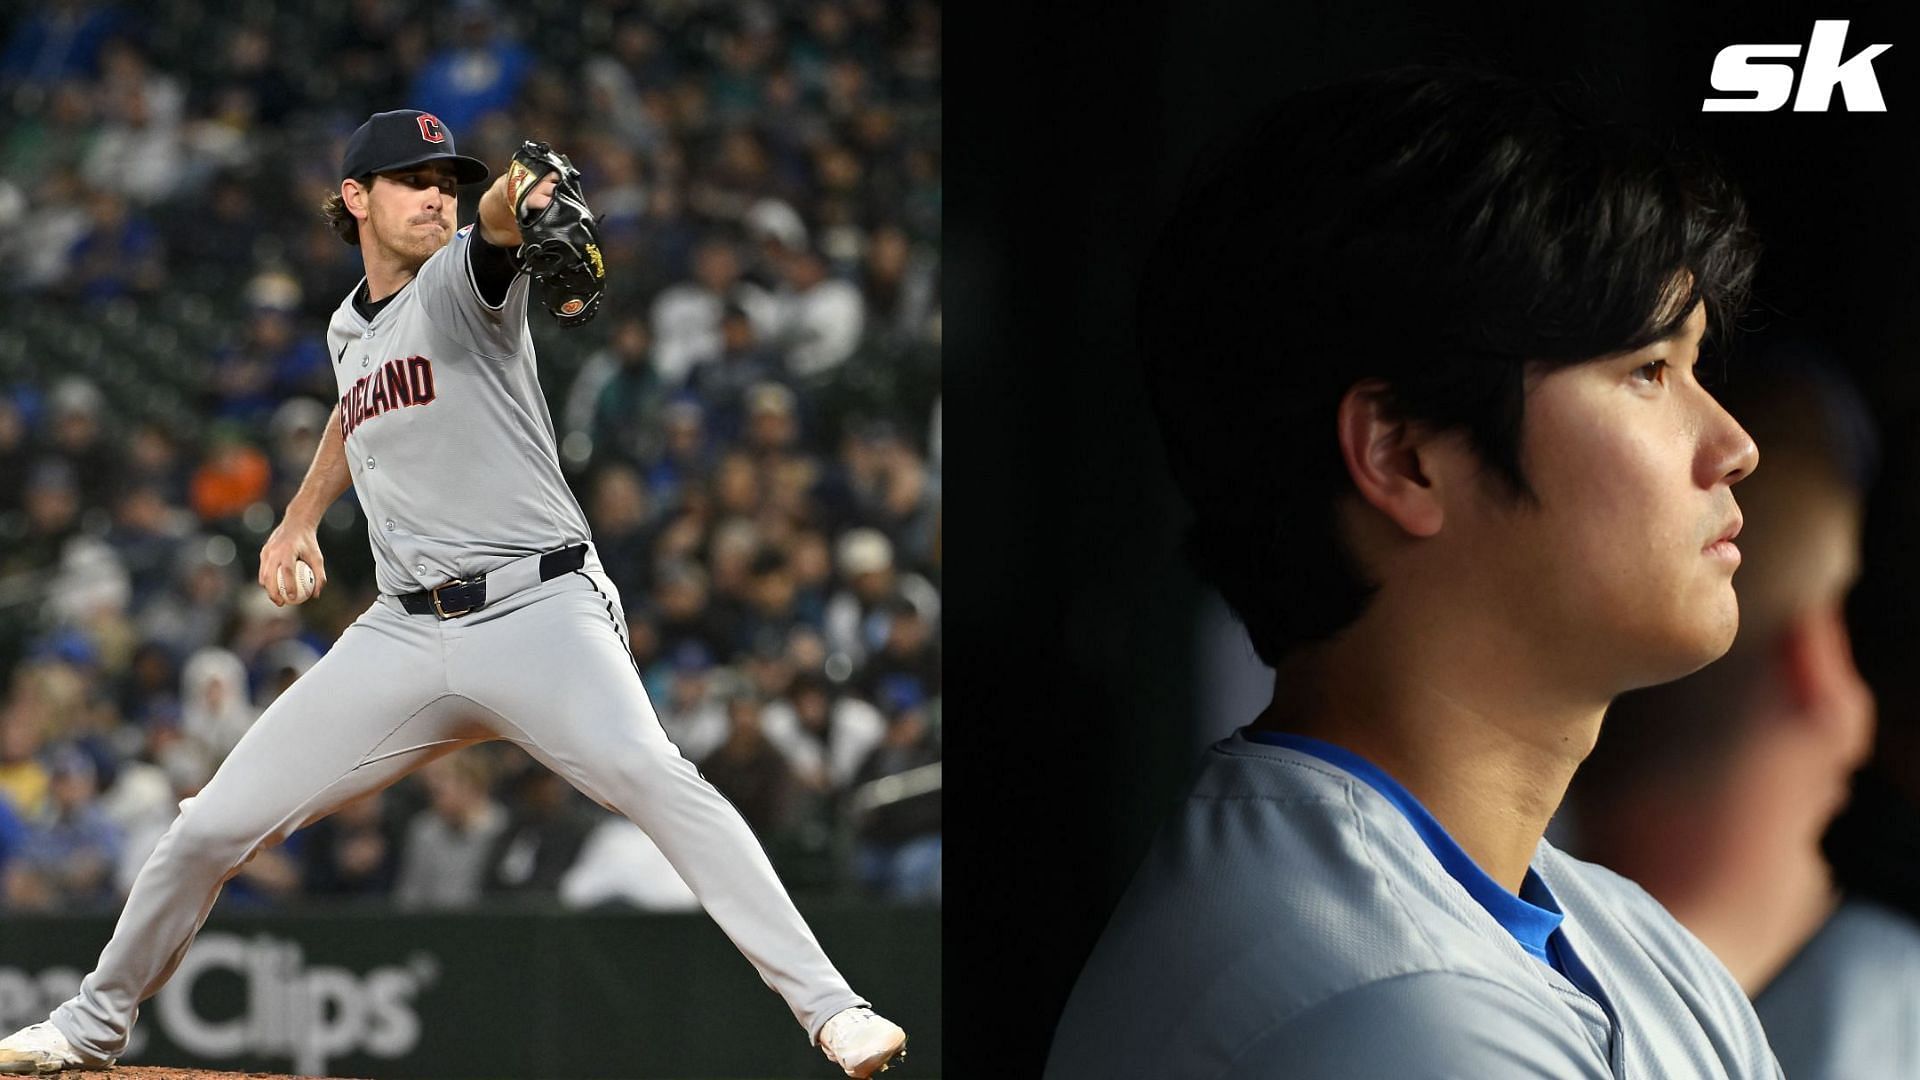 Dodgers star Shohei Ohtani remains uncertain if the MLB pitch clock is contirbuting to the rise in pitcher injuries